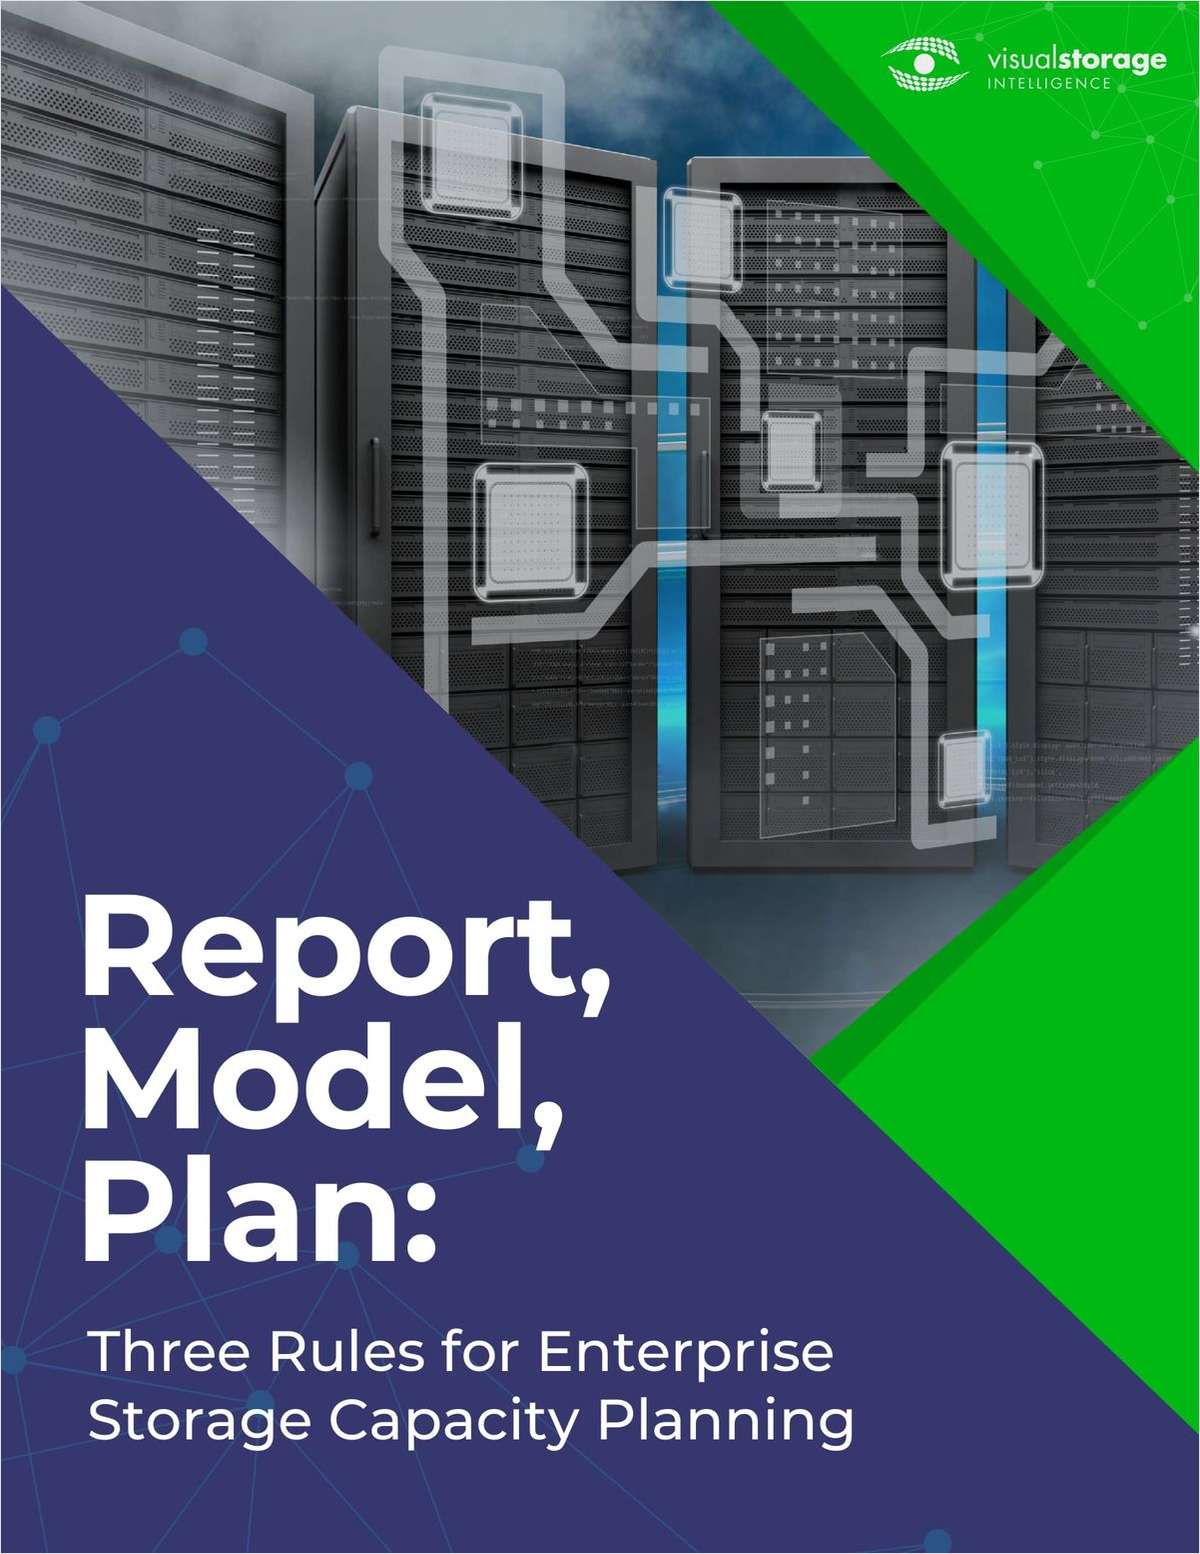 Report, Model, Plan: Three Rules for Enterprise Storage Capacity Planning